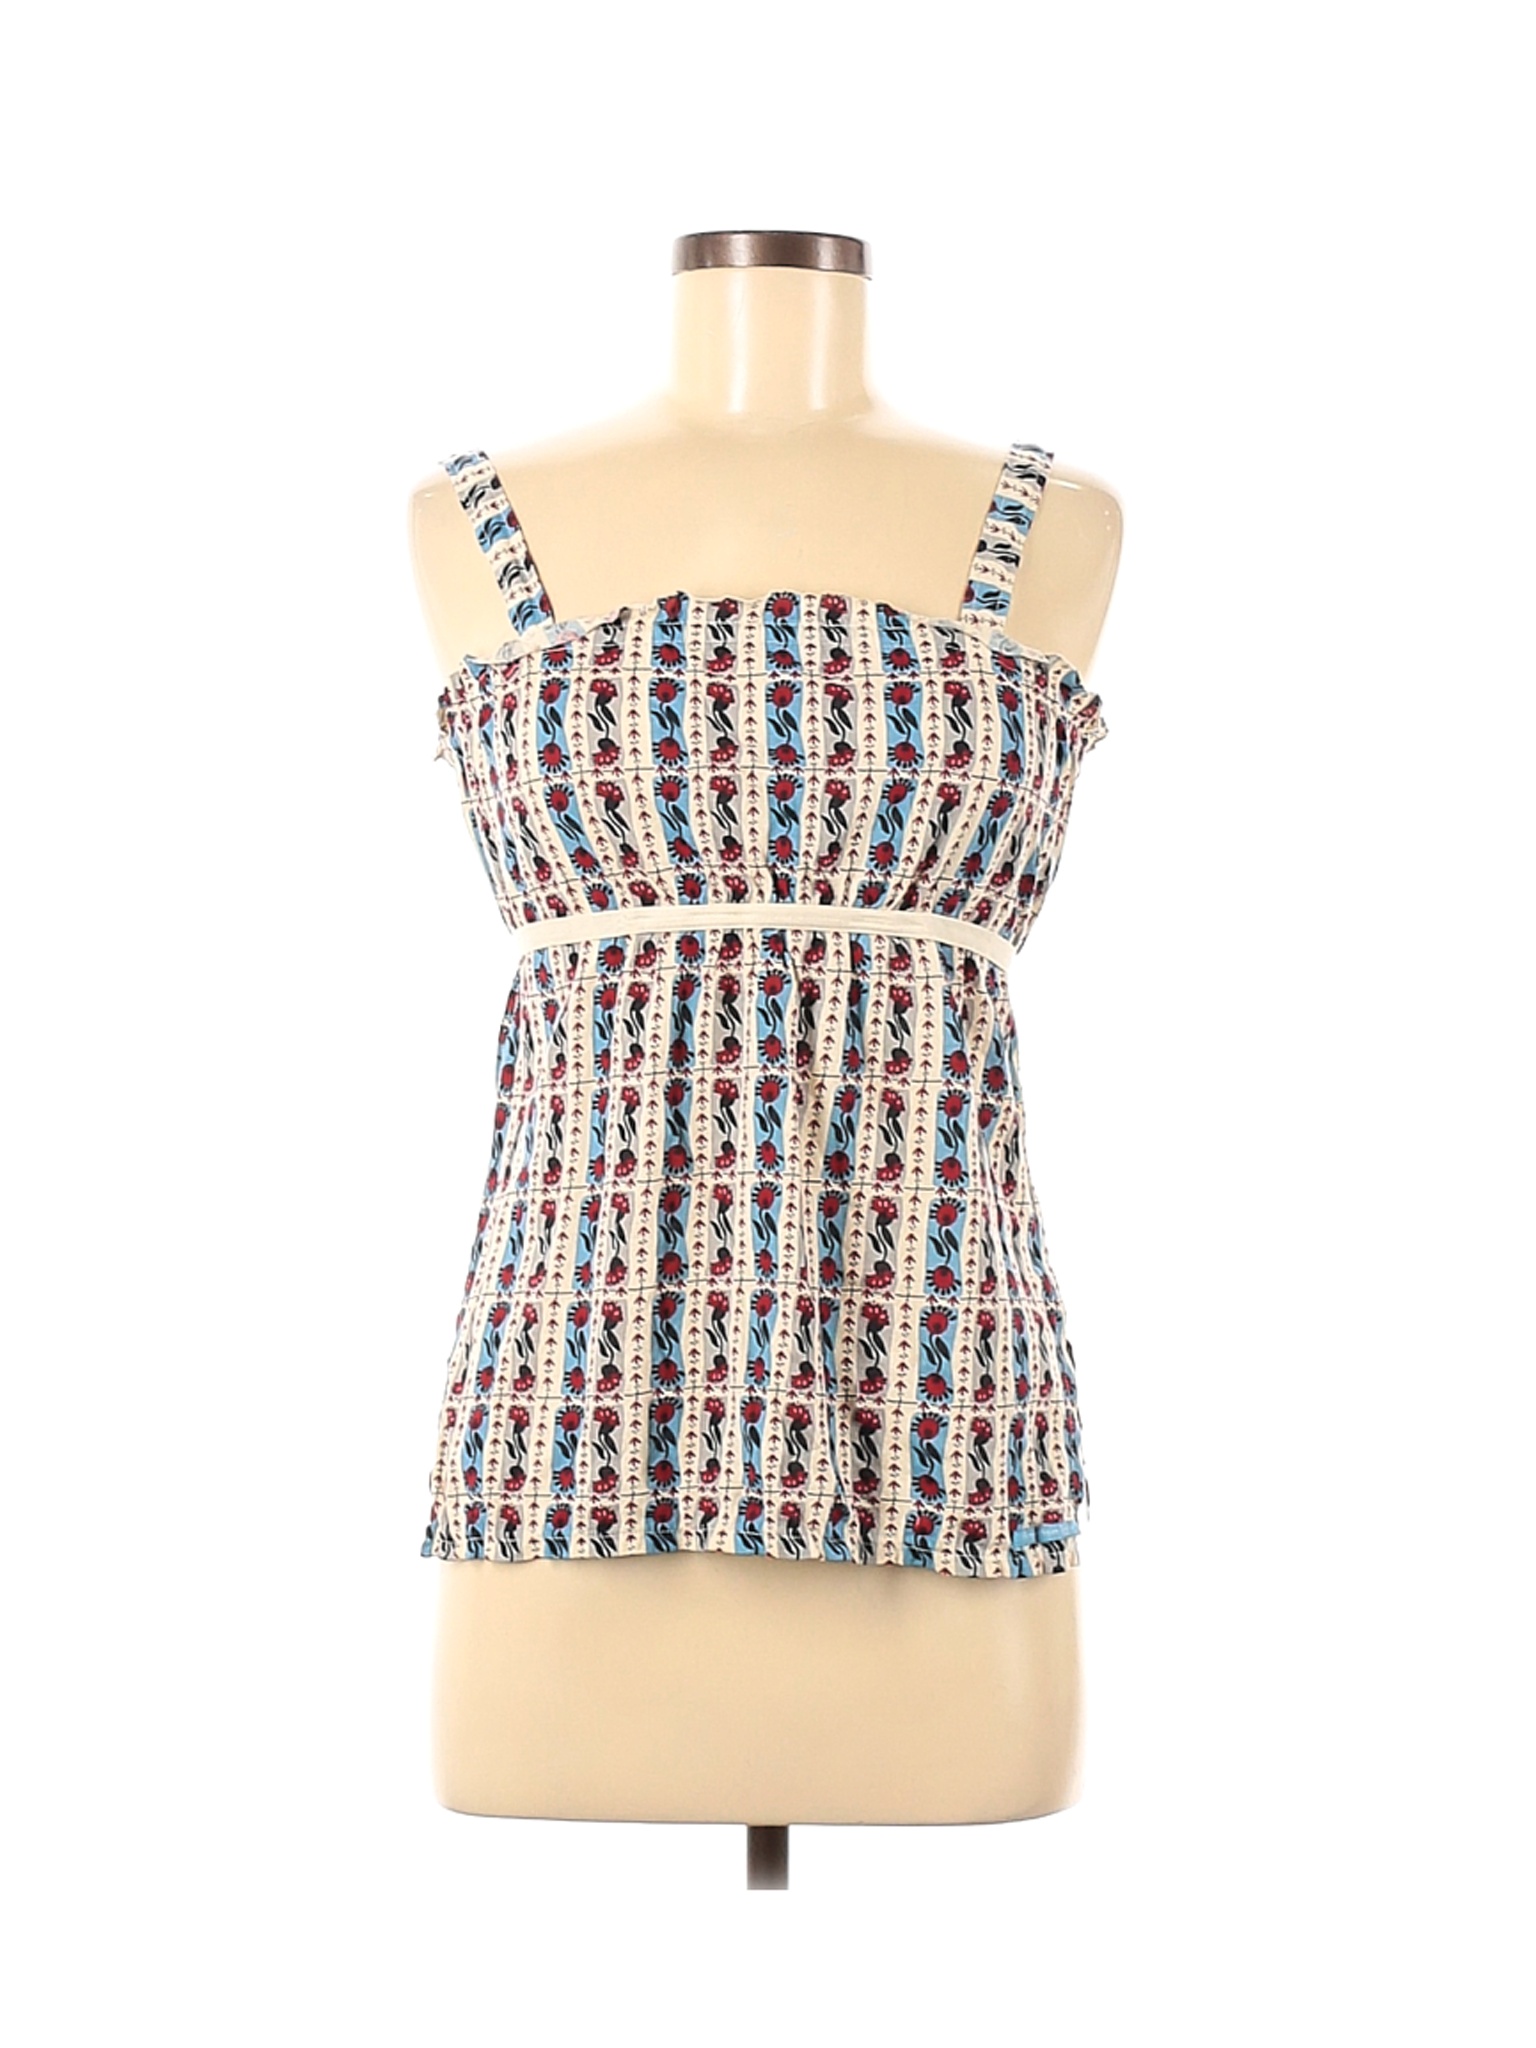 American Eagle Outfitters Women Blue Sleeveless Top M | eBay